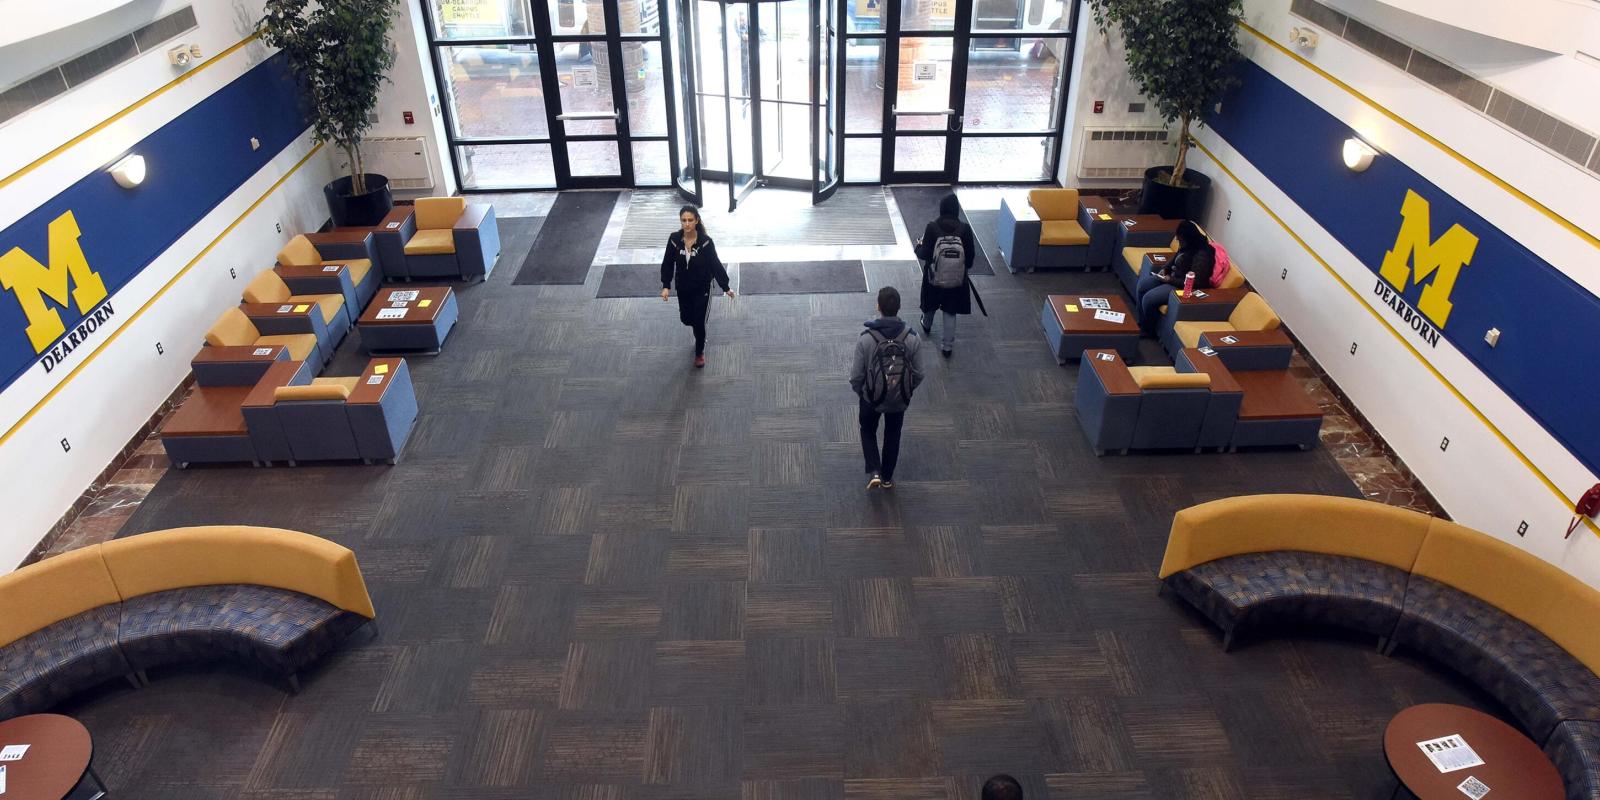 Picture of the lobby area of College of Business